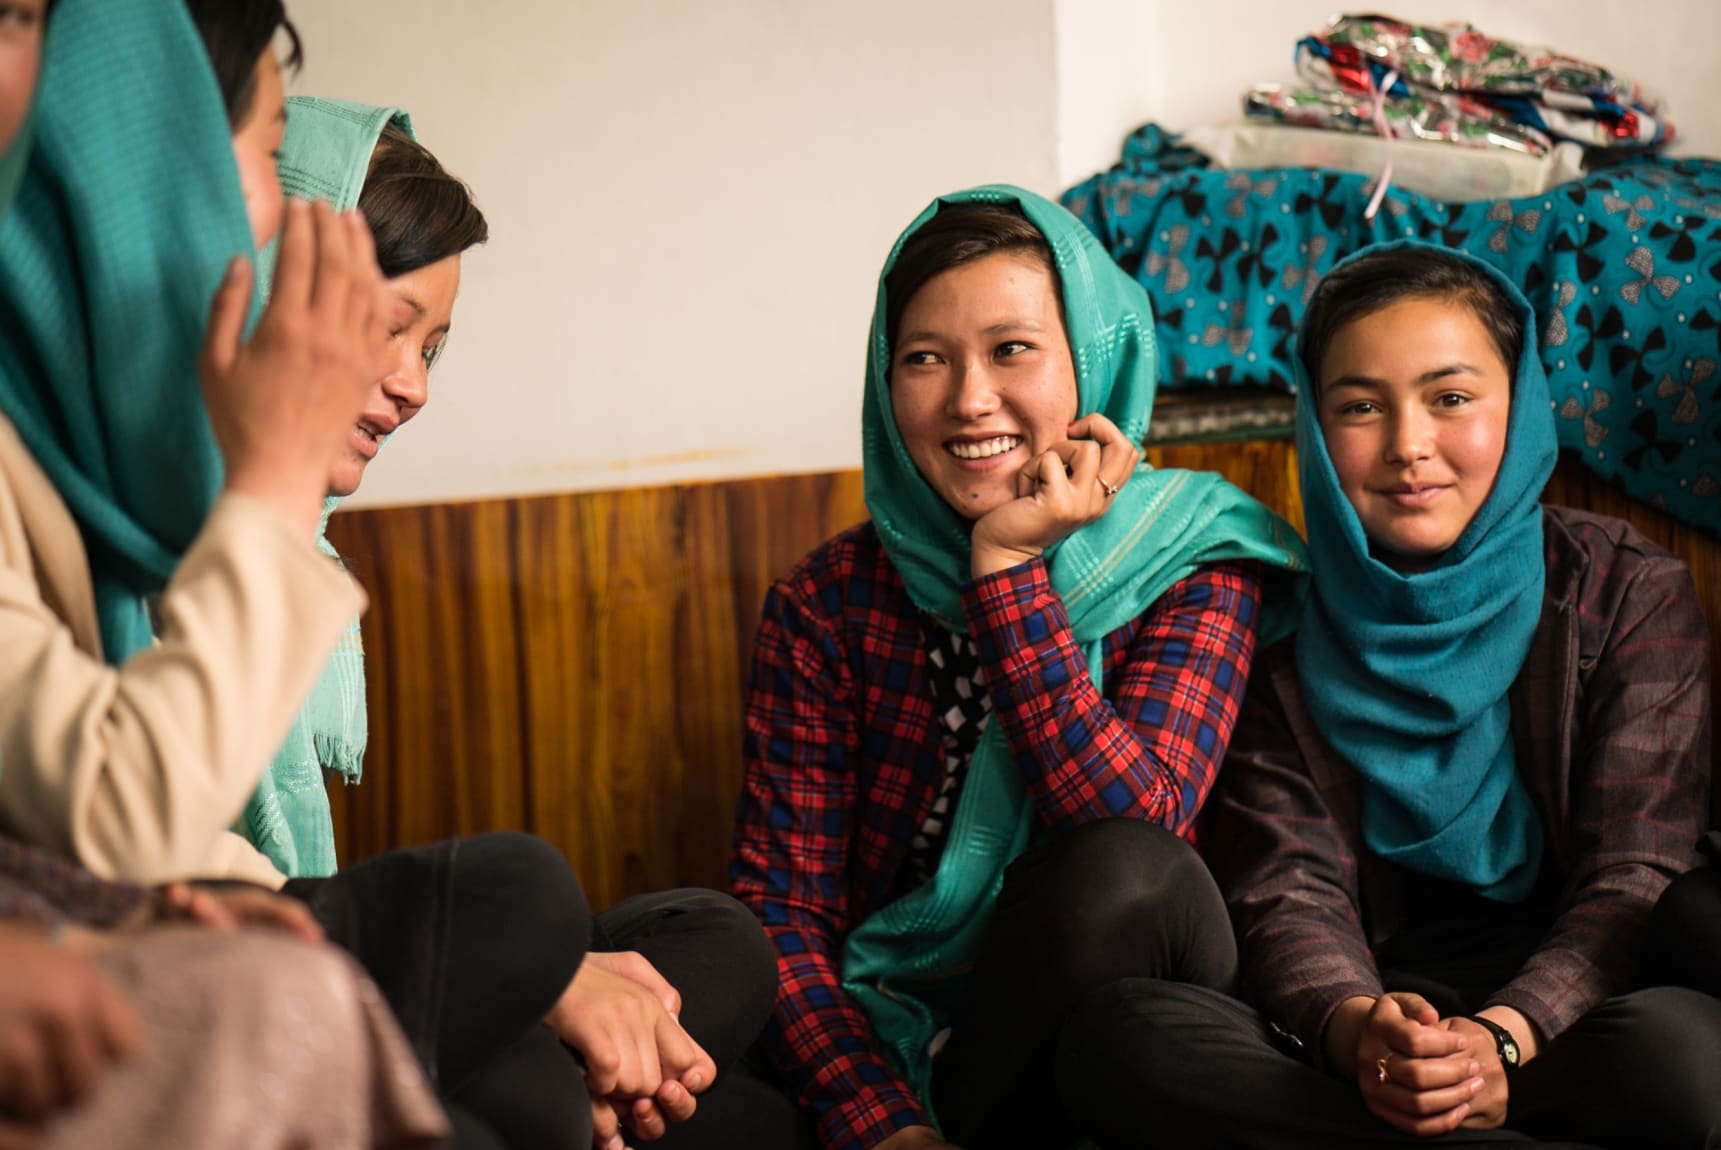 Against the backdrop of a white wall with a wood-effect sticker on the lower half, a girl wearing a purple plaid blazer, black trousers and teal hijab is pictured sitting cross-legged on the right, smiling and looking at the camera. Behind her is a piece of teal fabric draped over something and stacked with some unidentifiable shiny objects. On the left of the first girl is another wearing black trousers, a long-sleeved red and blue plaid top and turquoise hijab - she is smiling and resting her chin on her left hand as her left elbow is propped on her left knee. To the left of the frame we can see parts of the side profiles of 3 more women sat on the floor.